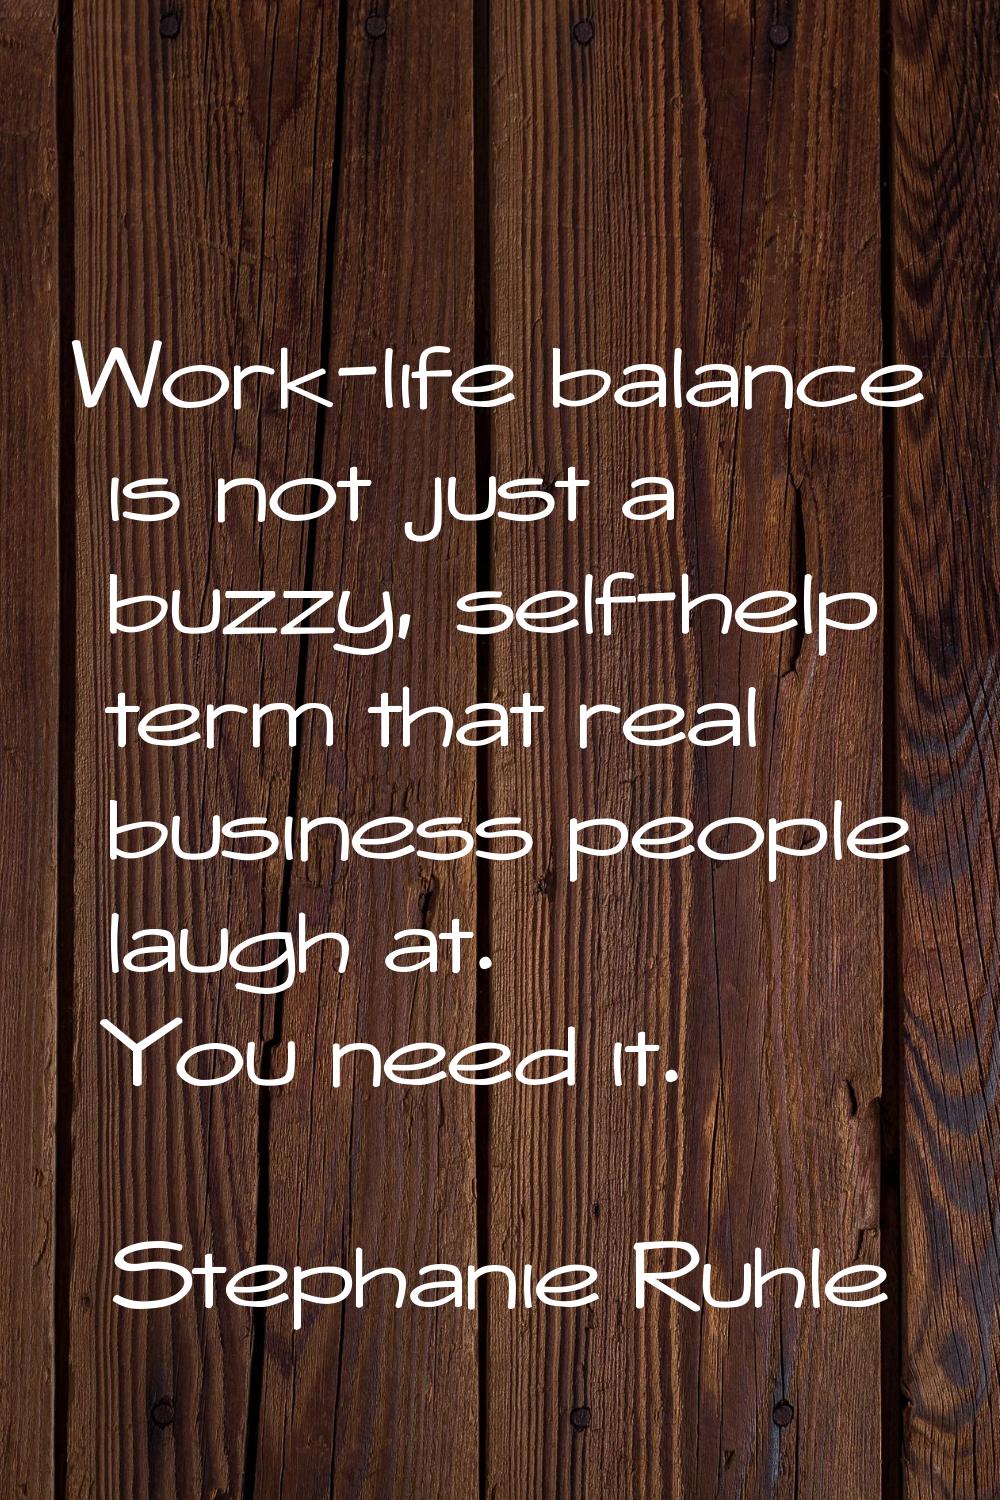 Work-life balance is not just a buzzy, self-help term that real business people laugh at. You need 